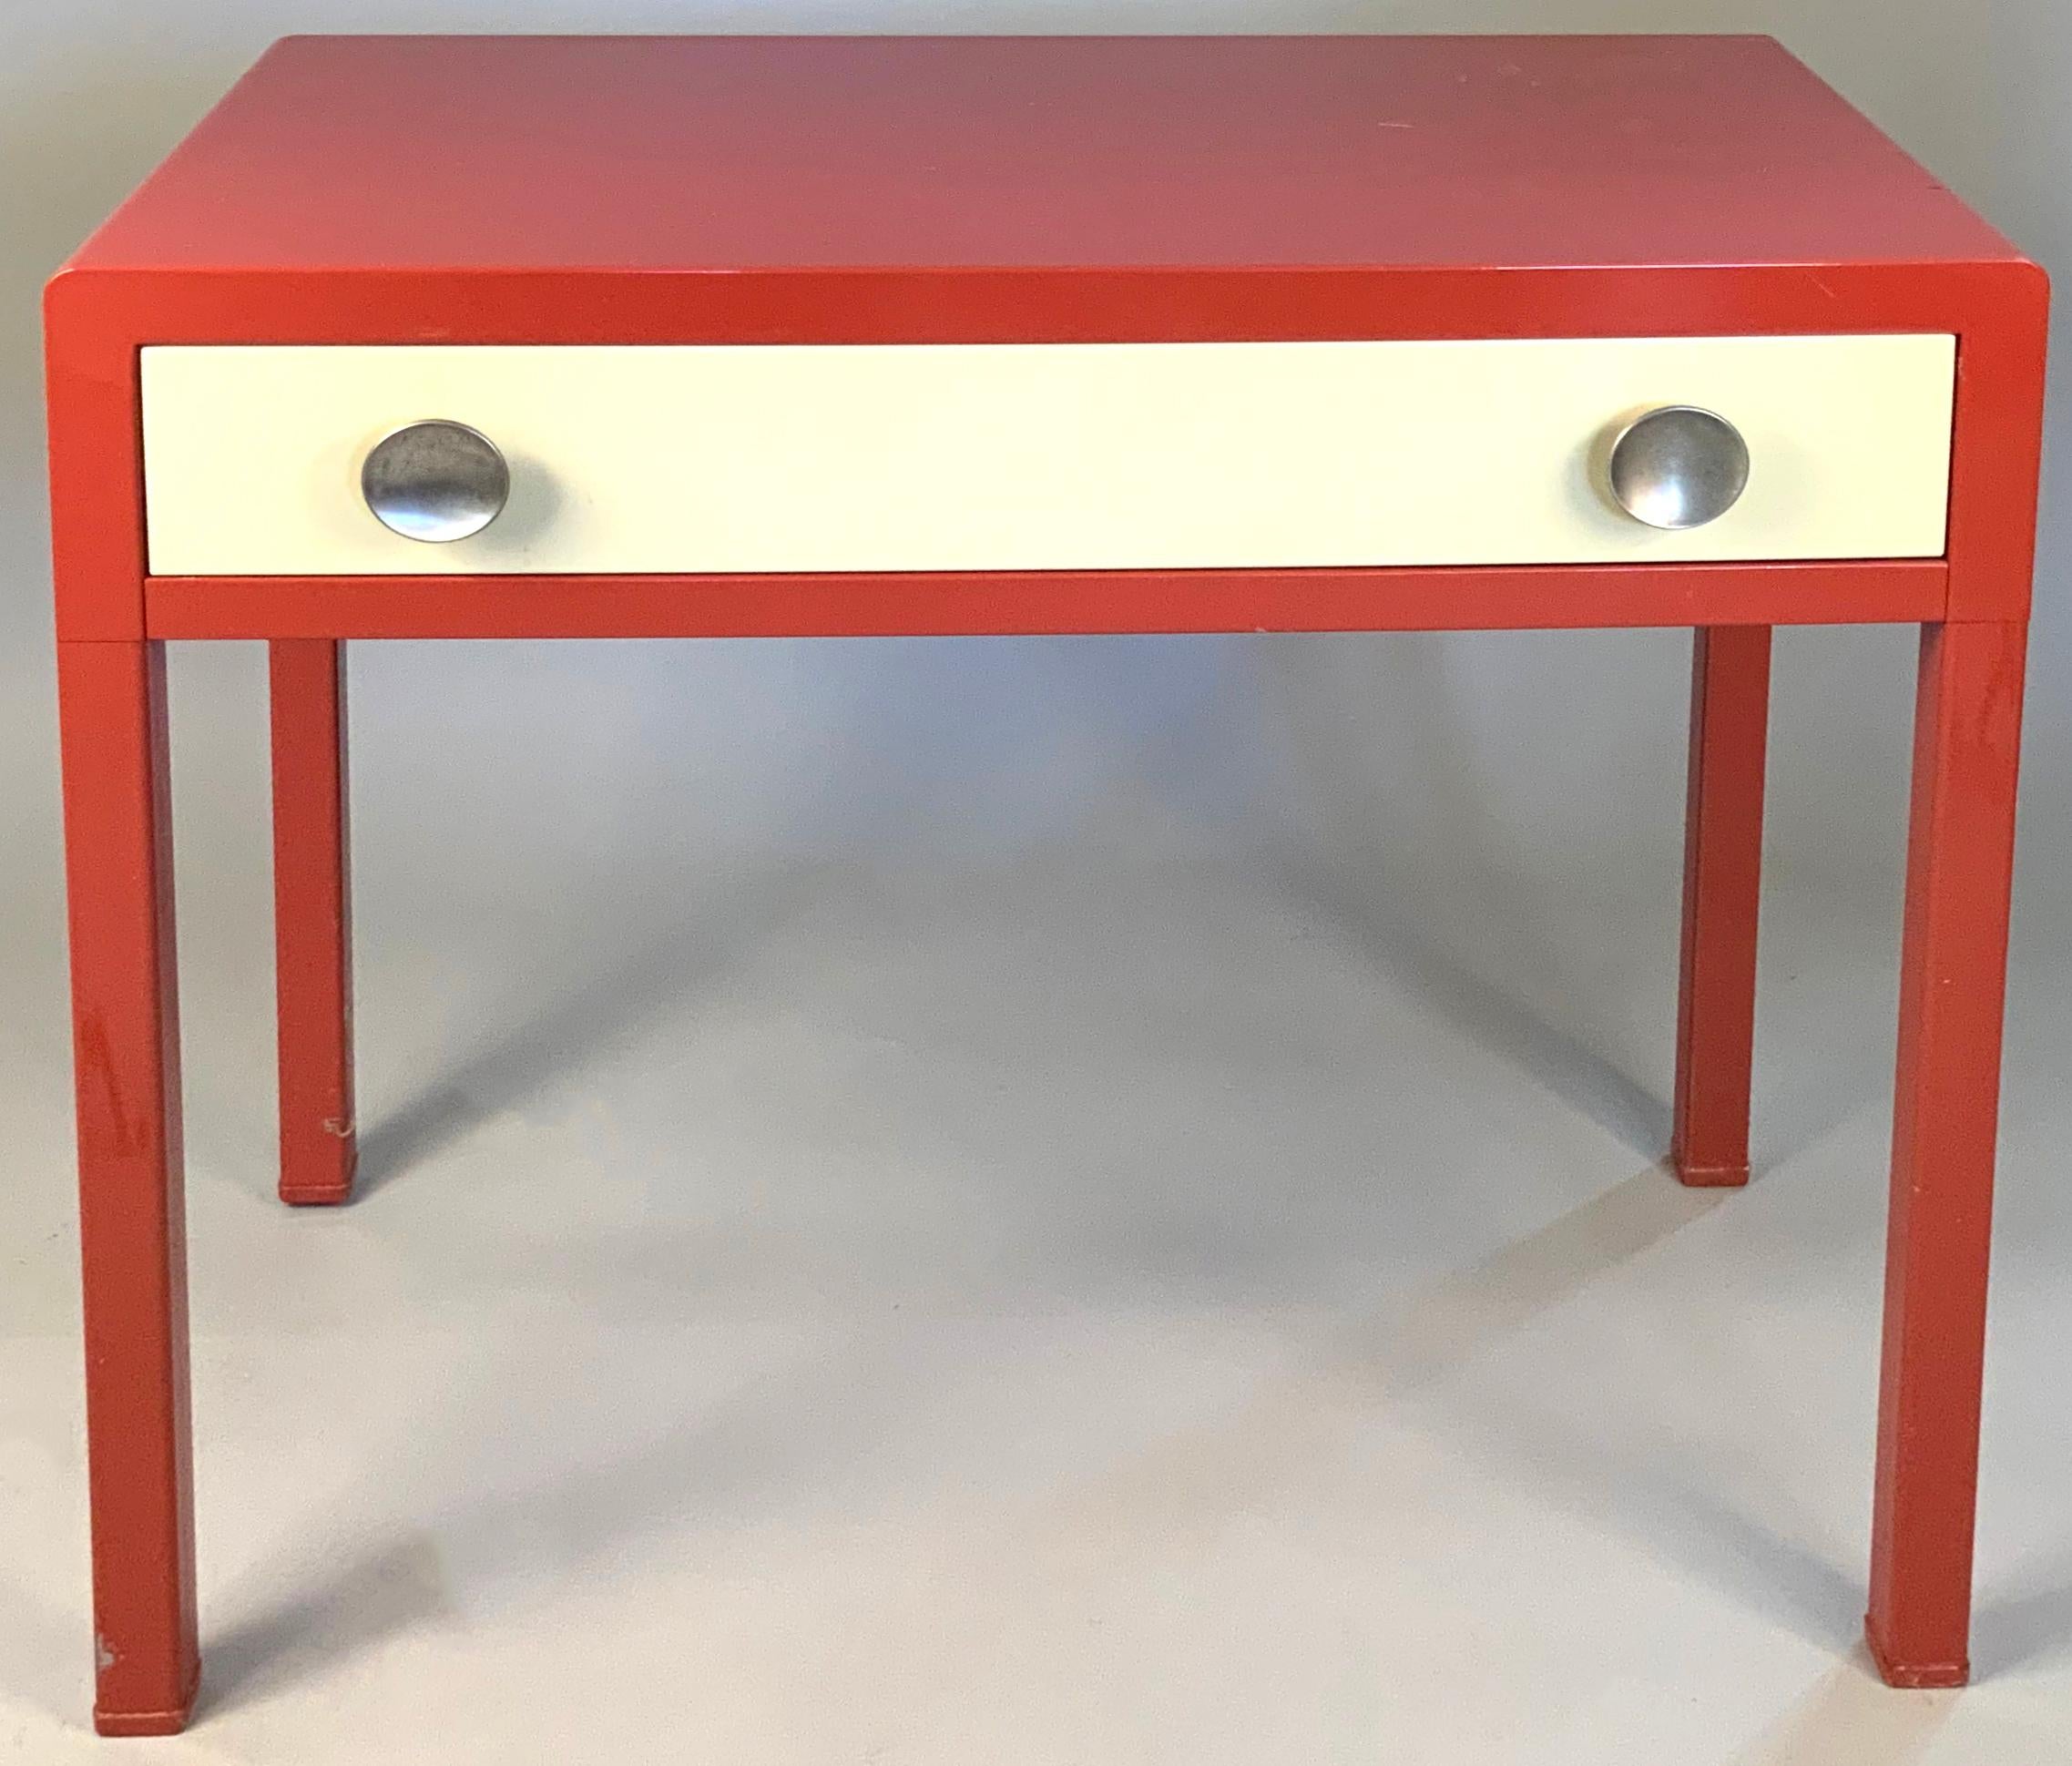 a nice example of this rare desk designed by Norman Bel Geddes for Simmons. the case colored in a red persimmon color, with the drawer front in ivory. the drawer with its original concave brushed aluminum drawer pulls. the top has age expected wear,